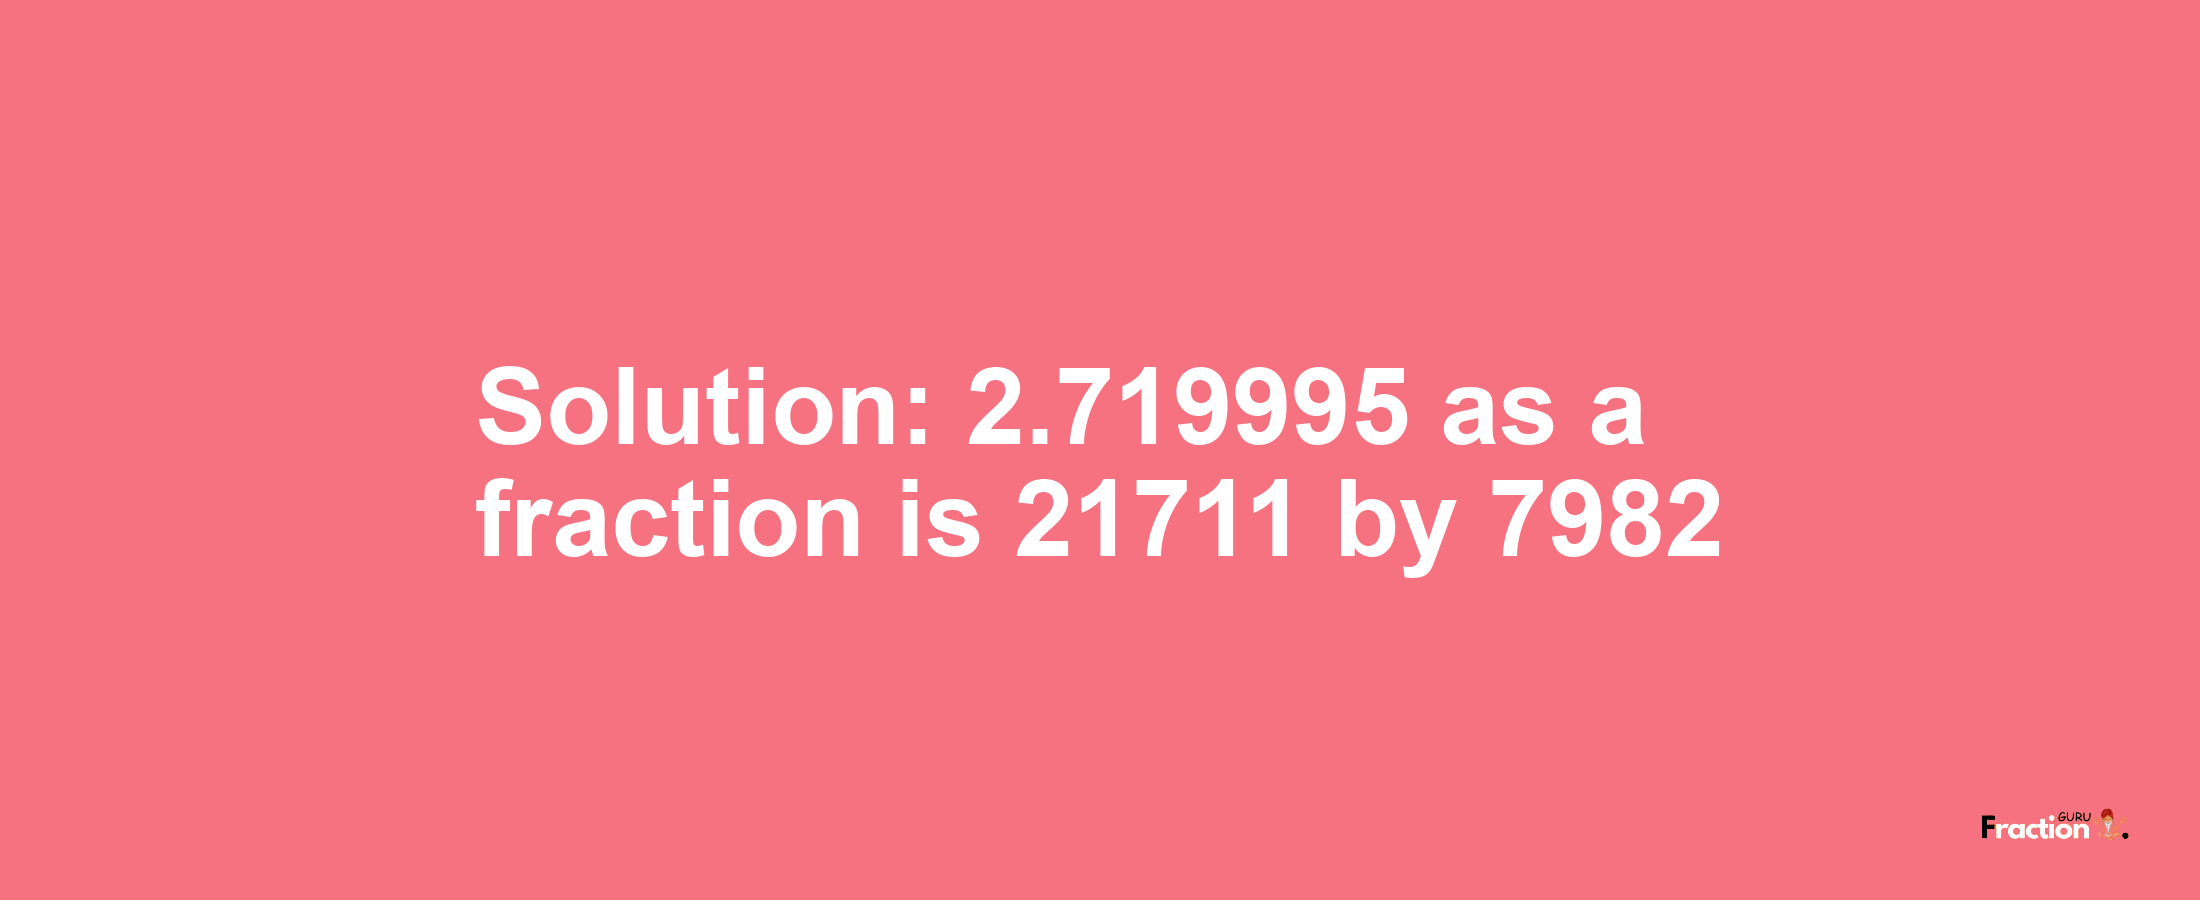 Solution:2.719995 as a fraction is 21711/7982